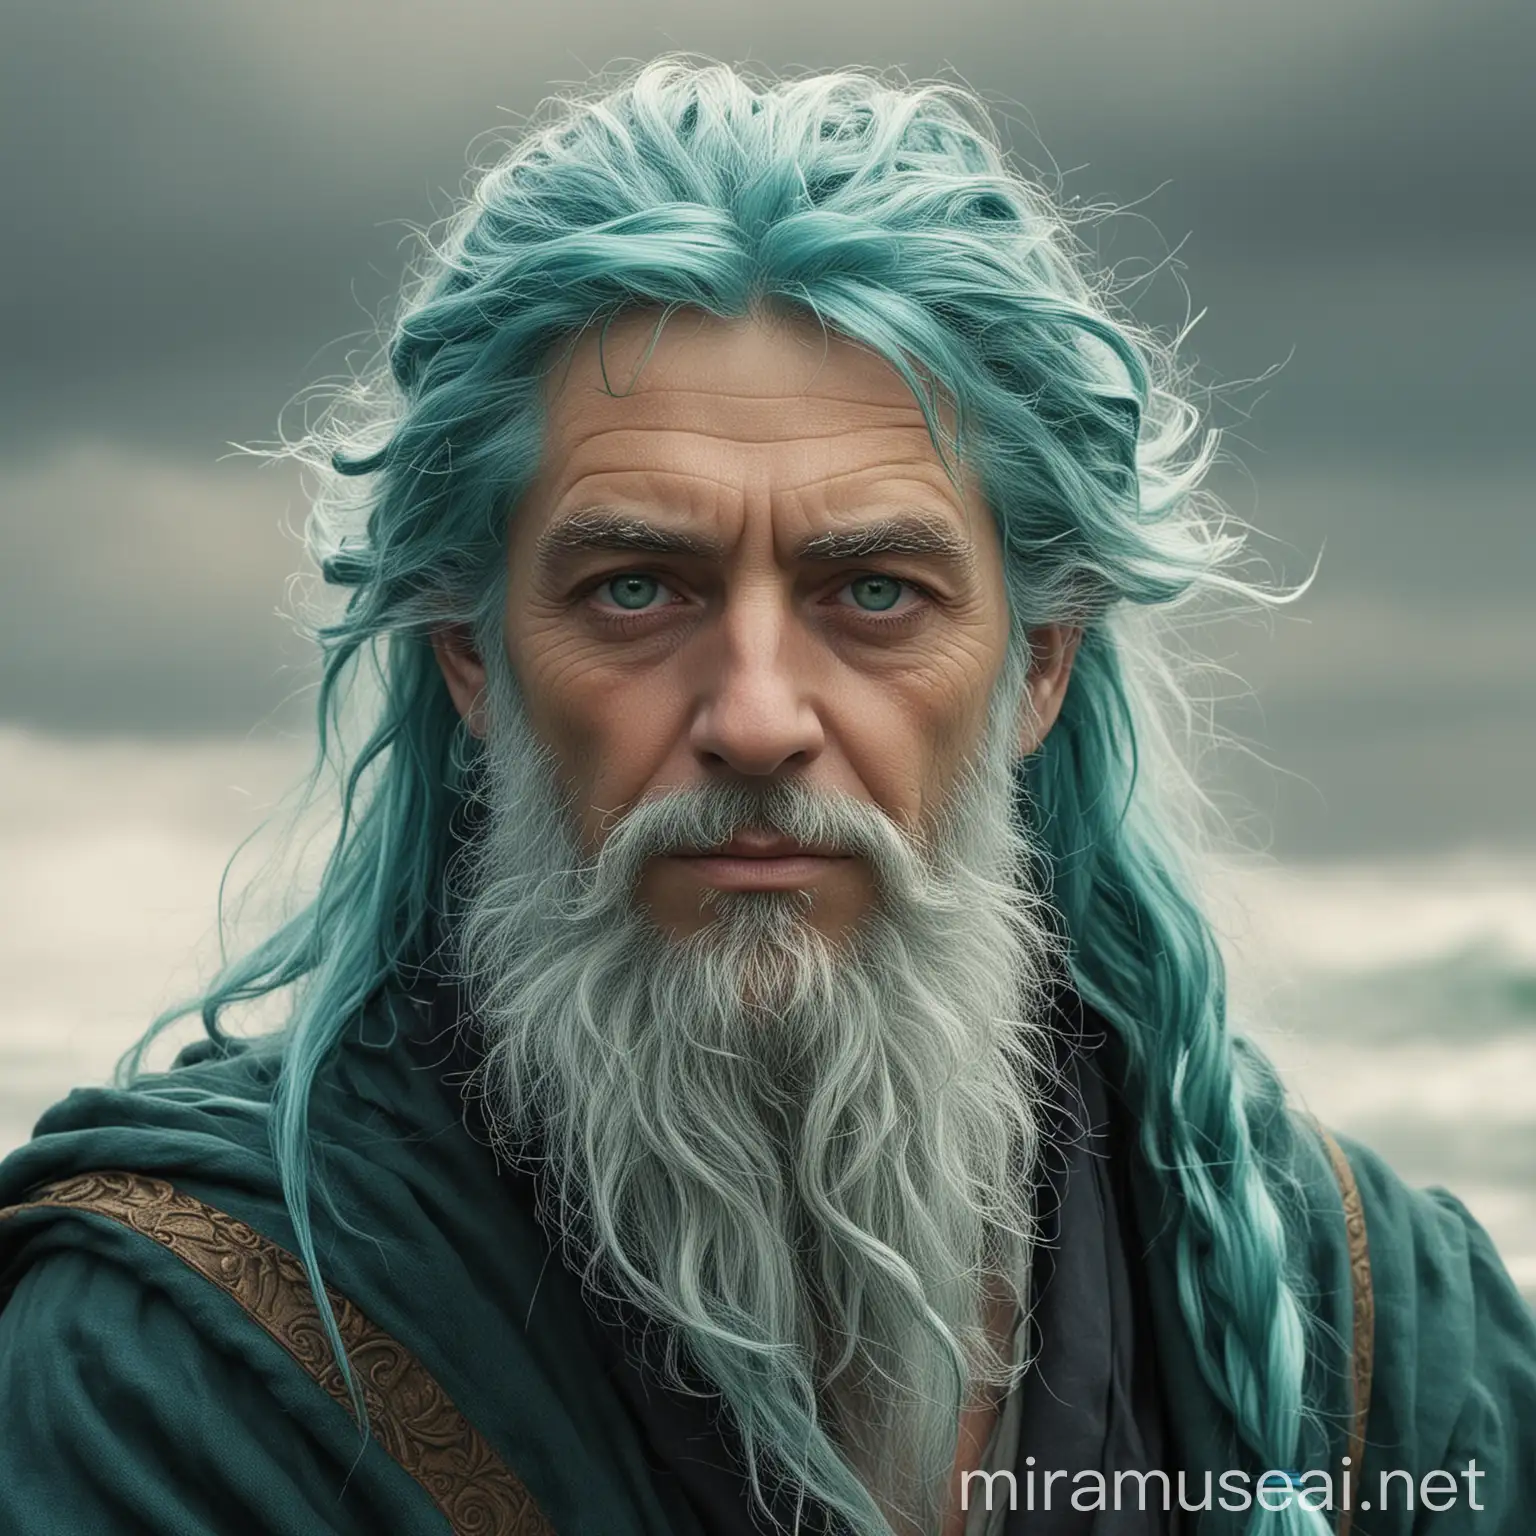 Mystical Wizard with SeaGreen Eyes and Flowing Blue Hair